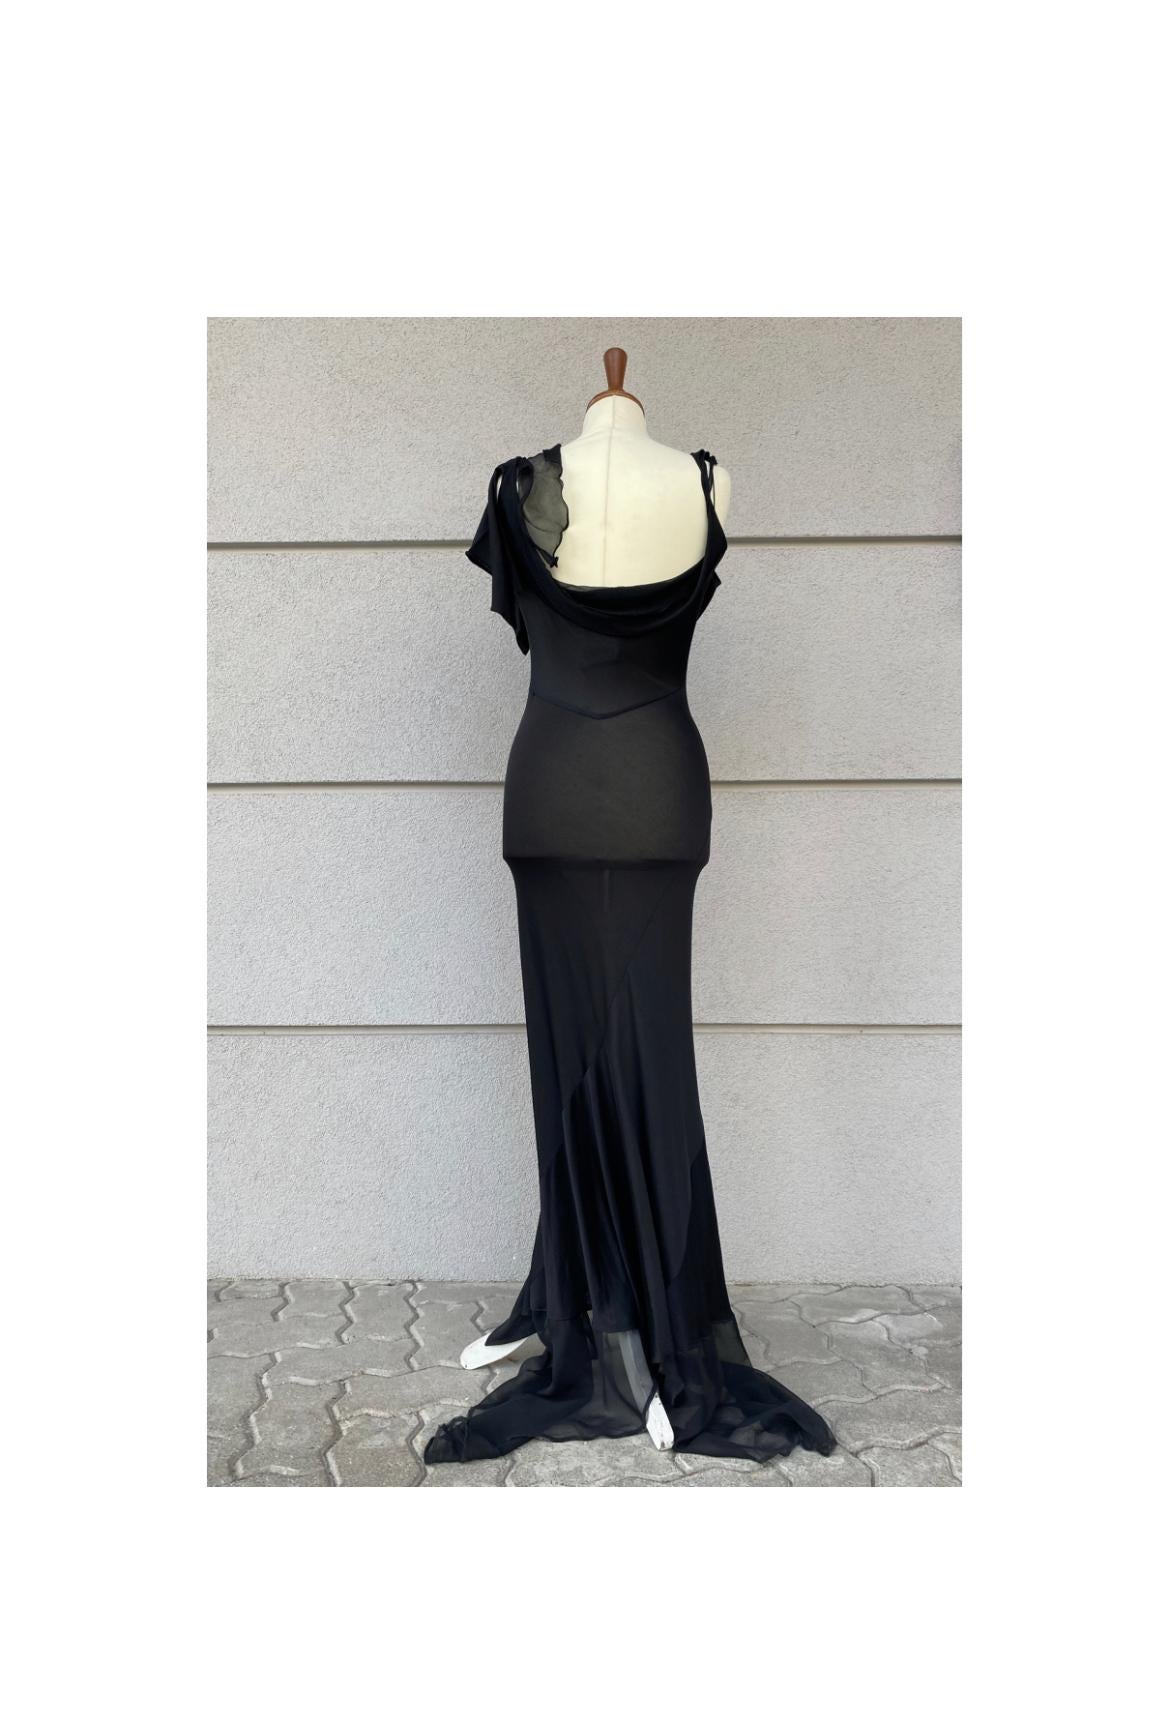 Black Evening Dress byJohn Galliano. Fashion show 1994. Also exhibited at the Met. For Sale